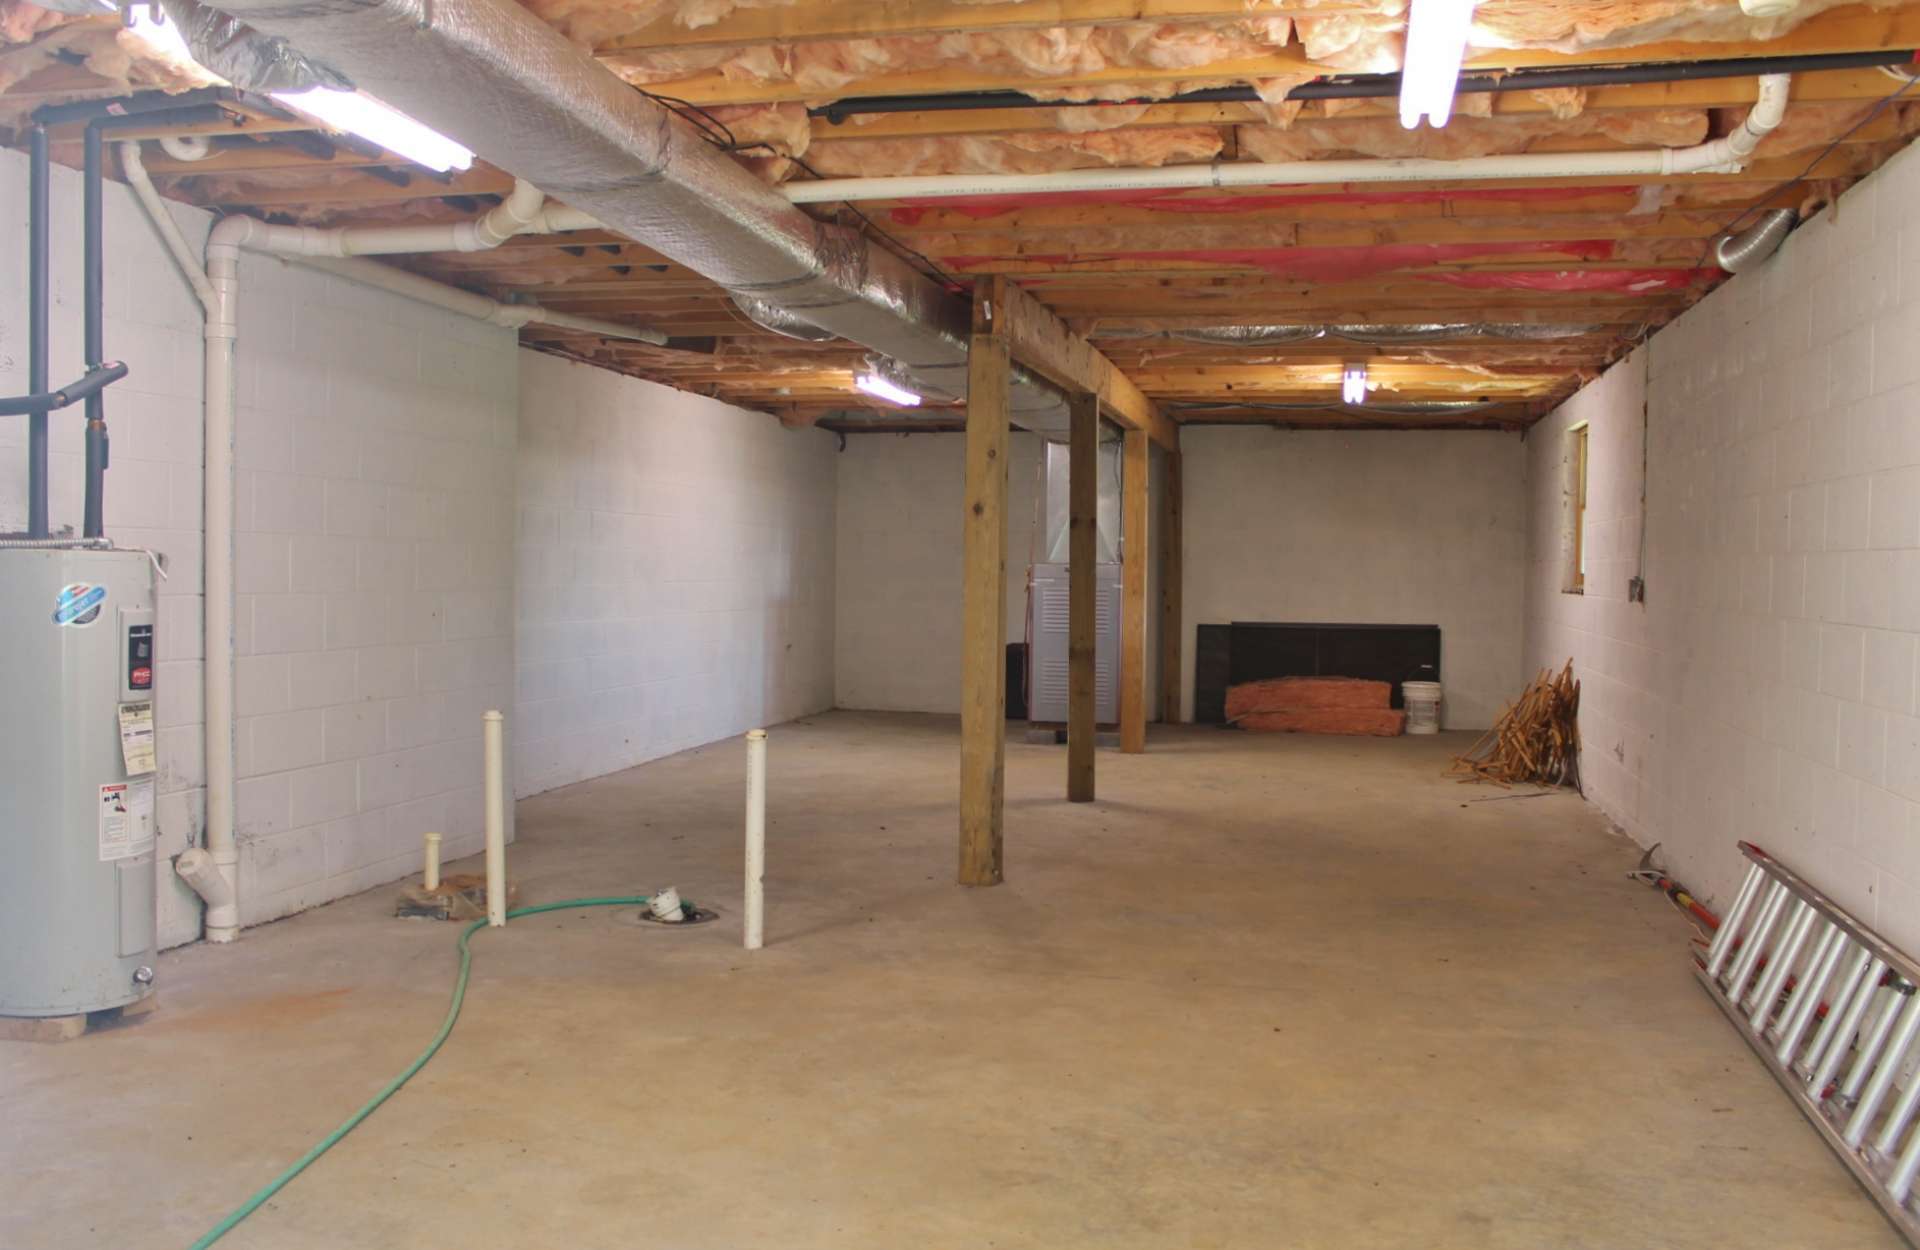 A full walk-out lower level offers a great workshop space that has plumbing stubbed in for future expansion potential. *There is currently no access from inside the house to the lower level.